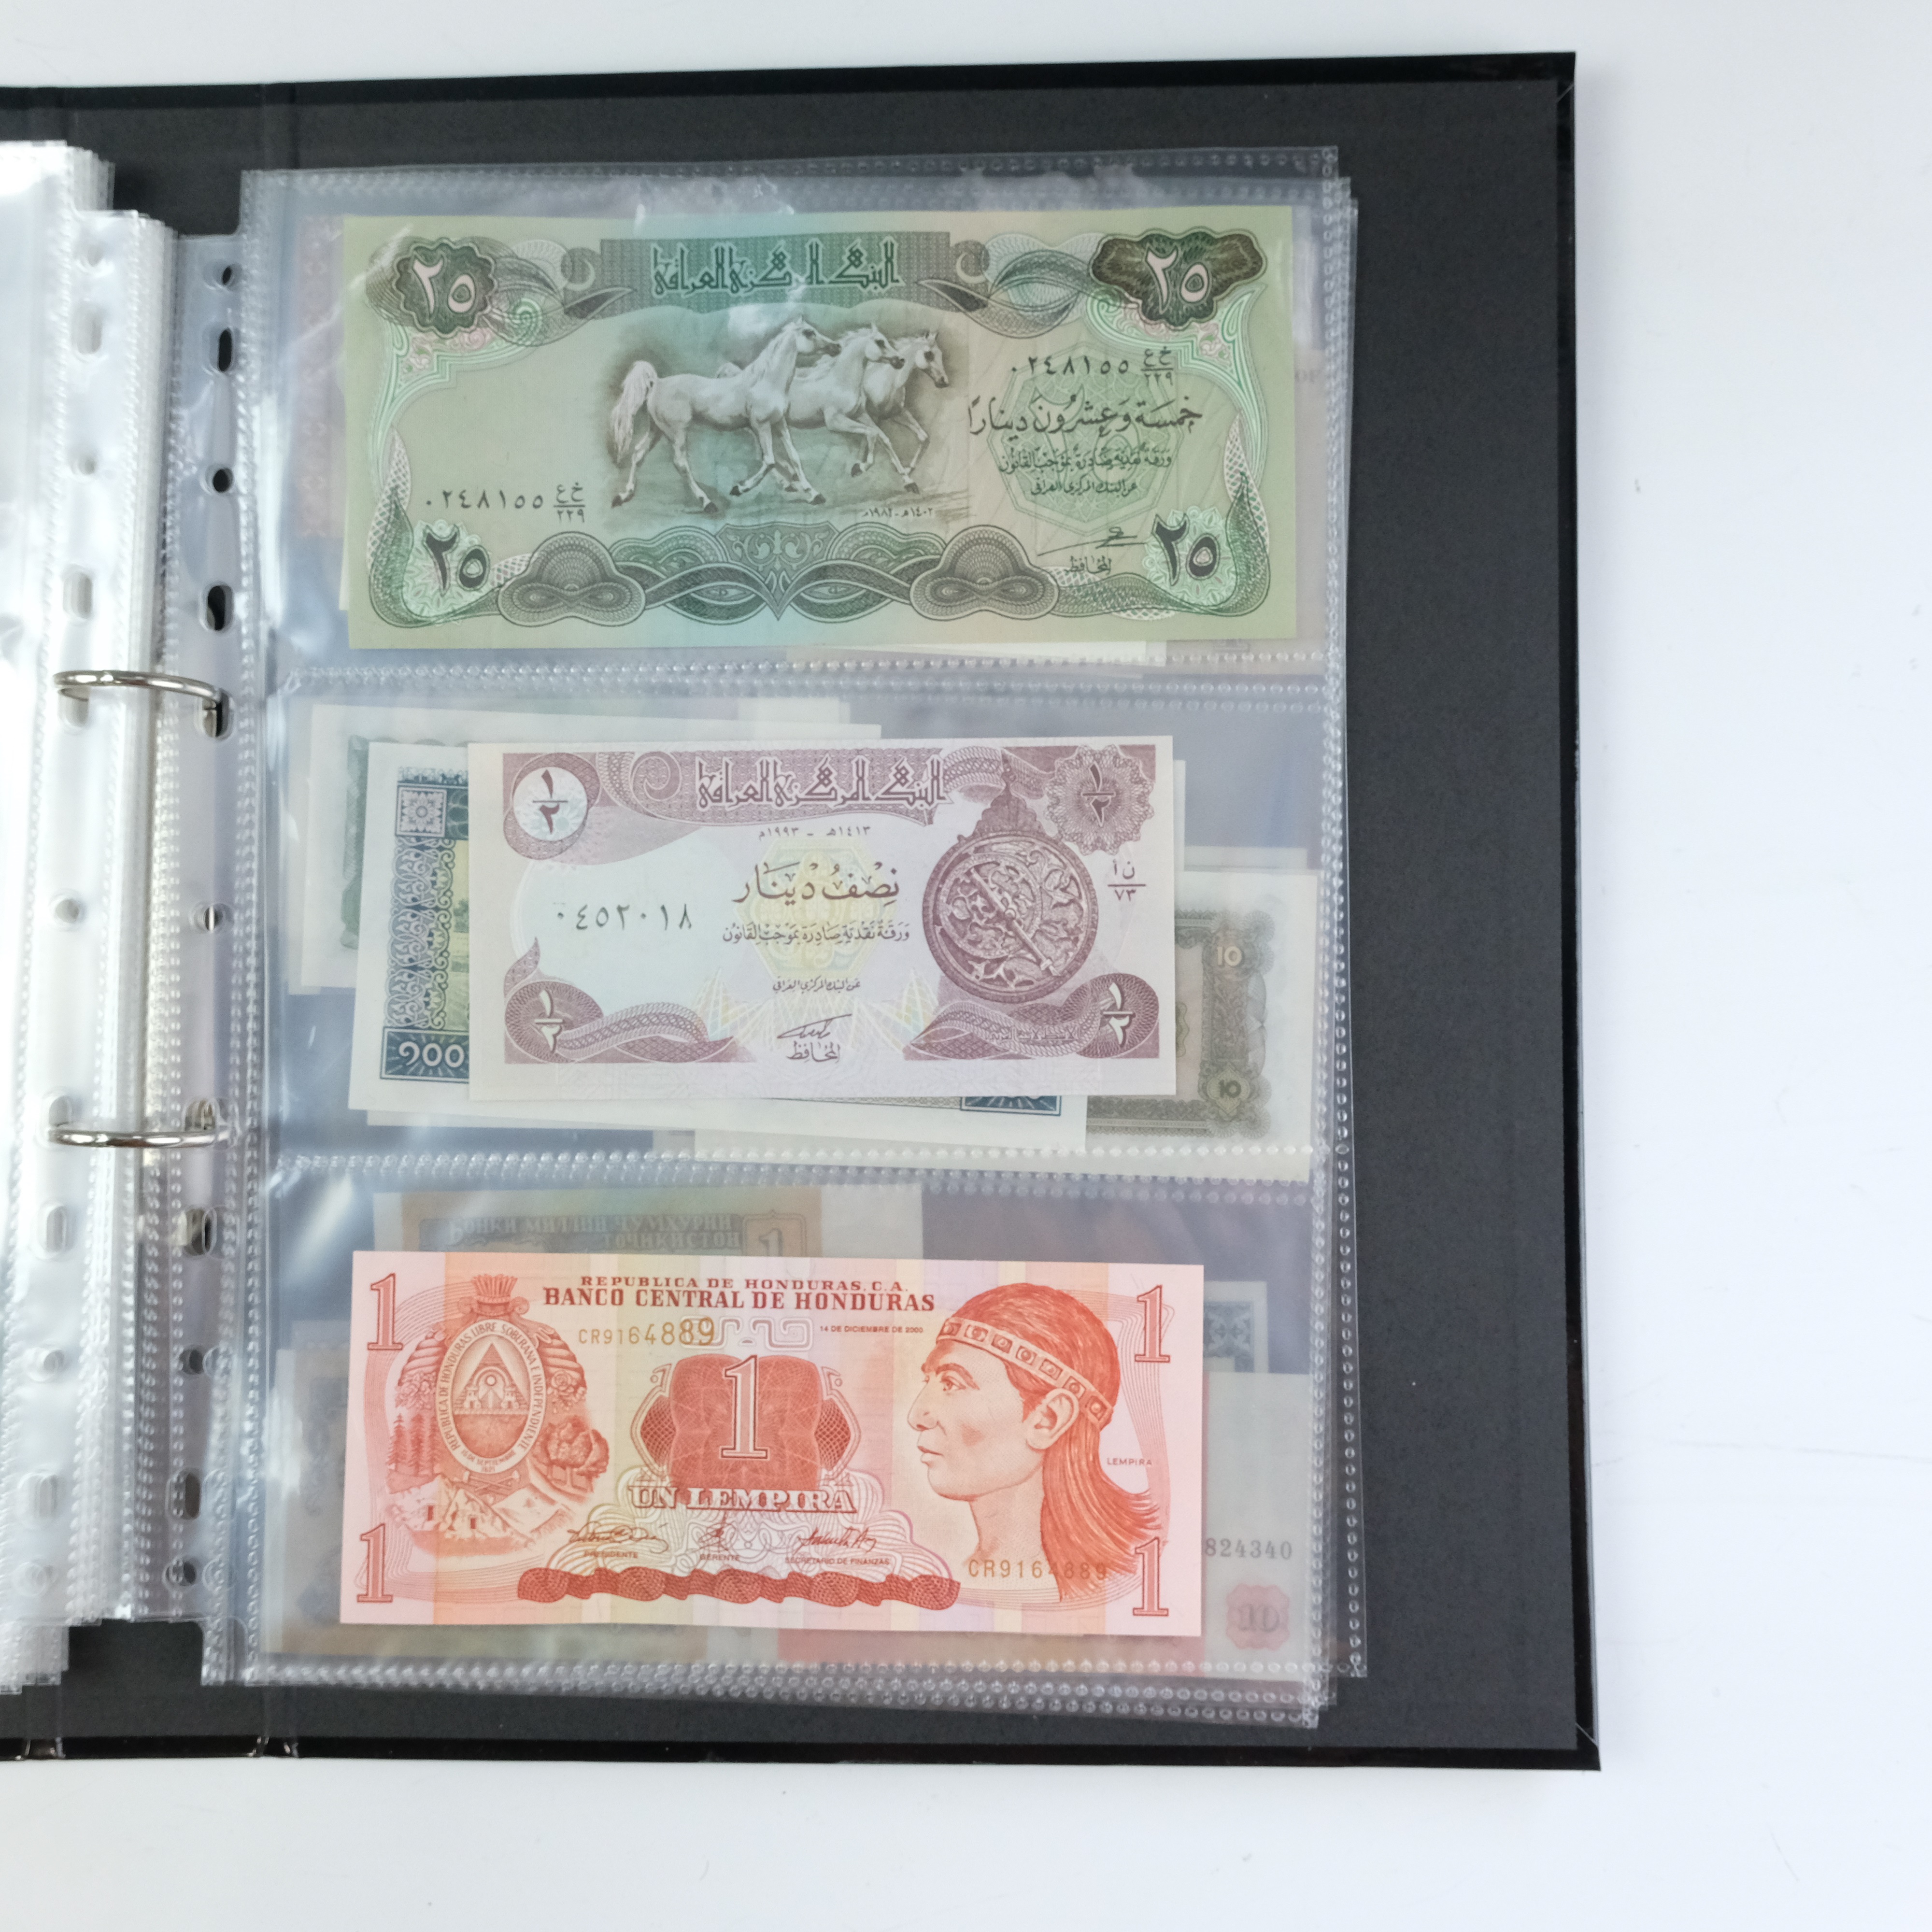 A well-presented album of world banknotes including Indonesia, Yugoslavia, Belarus, Peru, Brazil, - Image 25 of 30